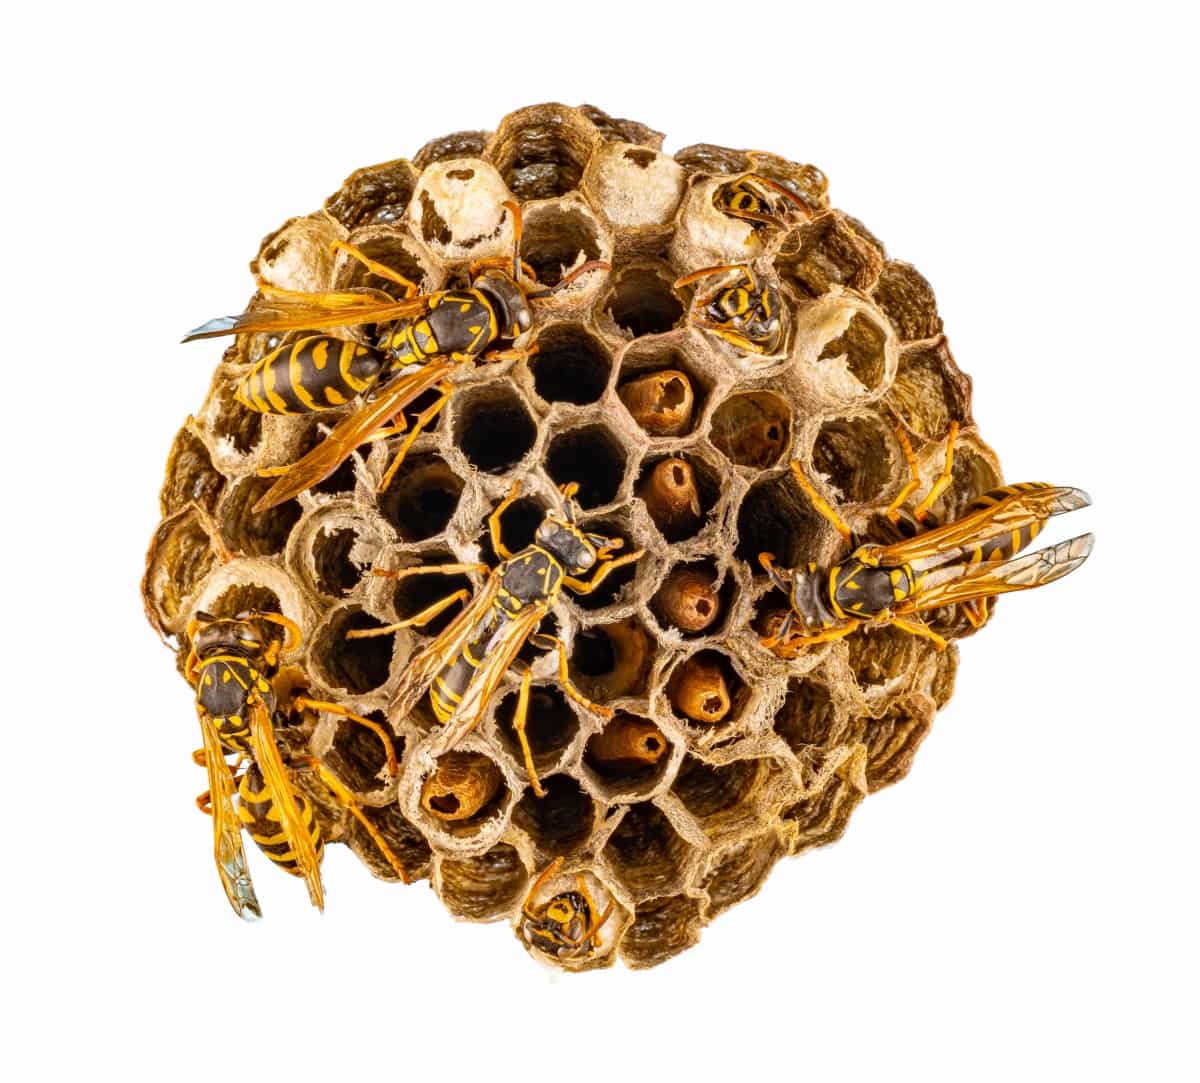 Wasp Nest with Wasps